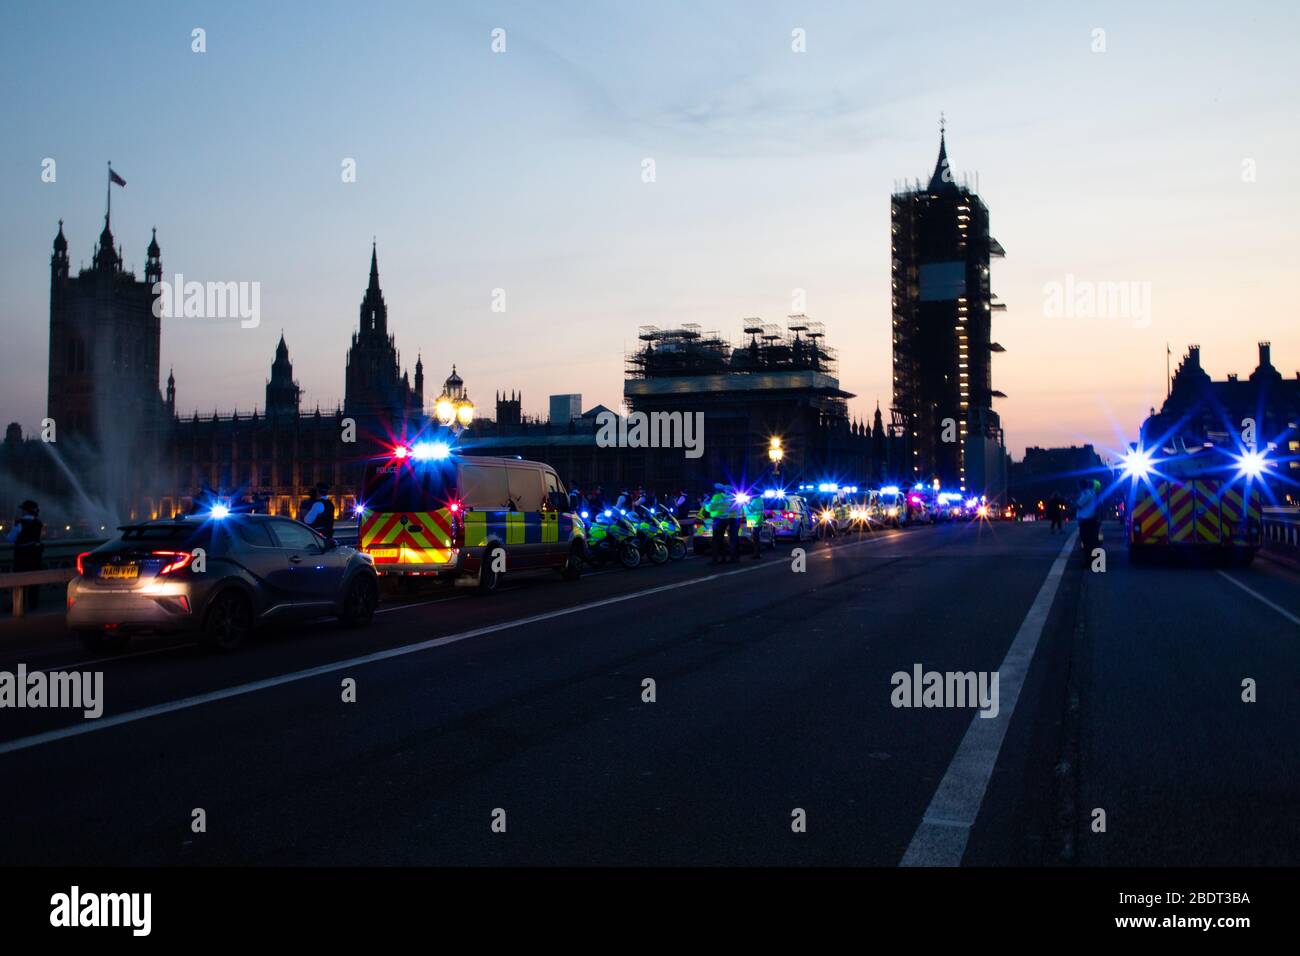 London, UK. 09th Apr, 2020. Emergency services take part in the Clap for Carers on Westminster Bridge in view of St Thomas' Hospital where the Prime Minister Boris Johnson is being treated for Covid 19. Credit: David Parry/Alamy Live News Stock Photo